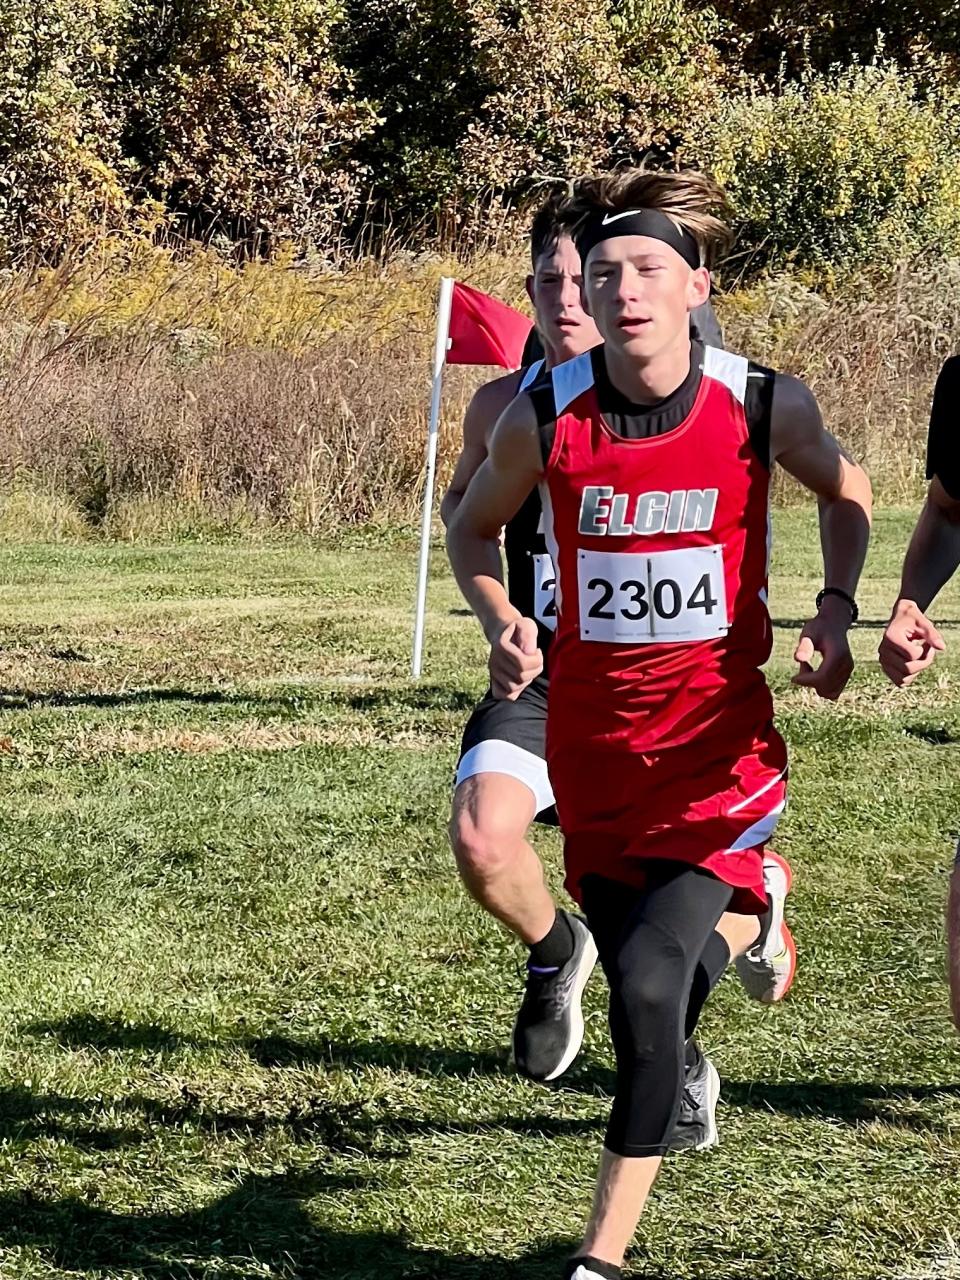 Elgin's Ethan Marshall runs at the Marion Harding Cross Country Invitational earlier this season. Marshall was Northwest Central Conference boys runner-up on Saturday at Hardin Northern.